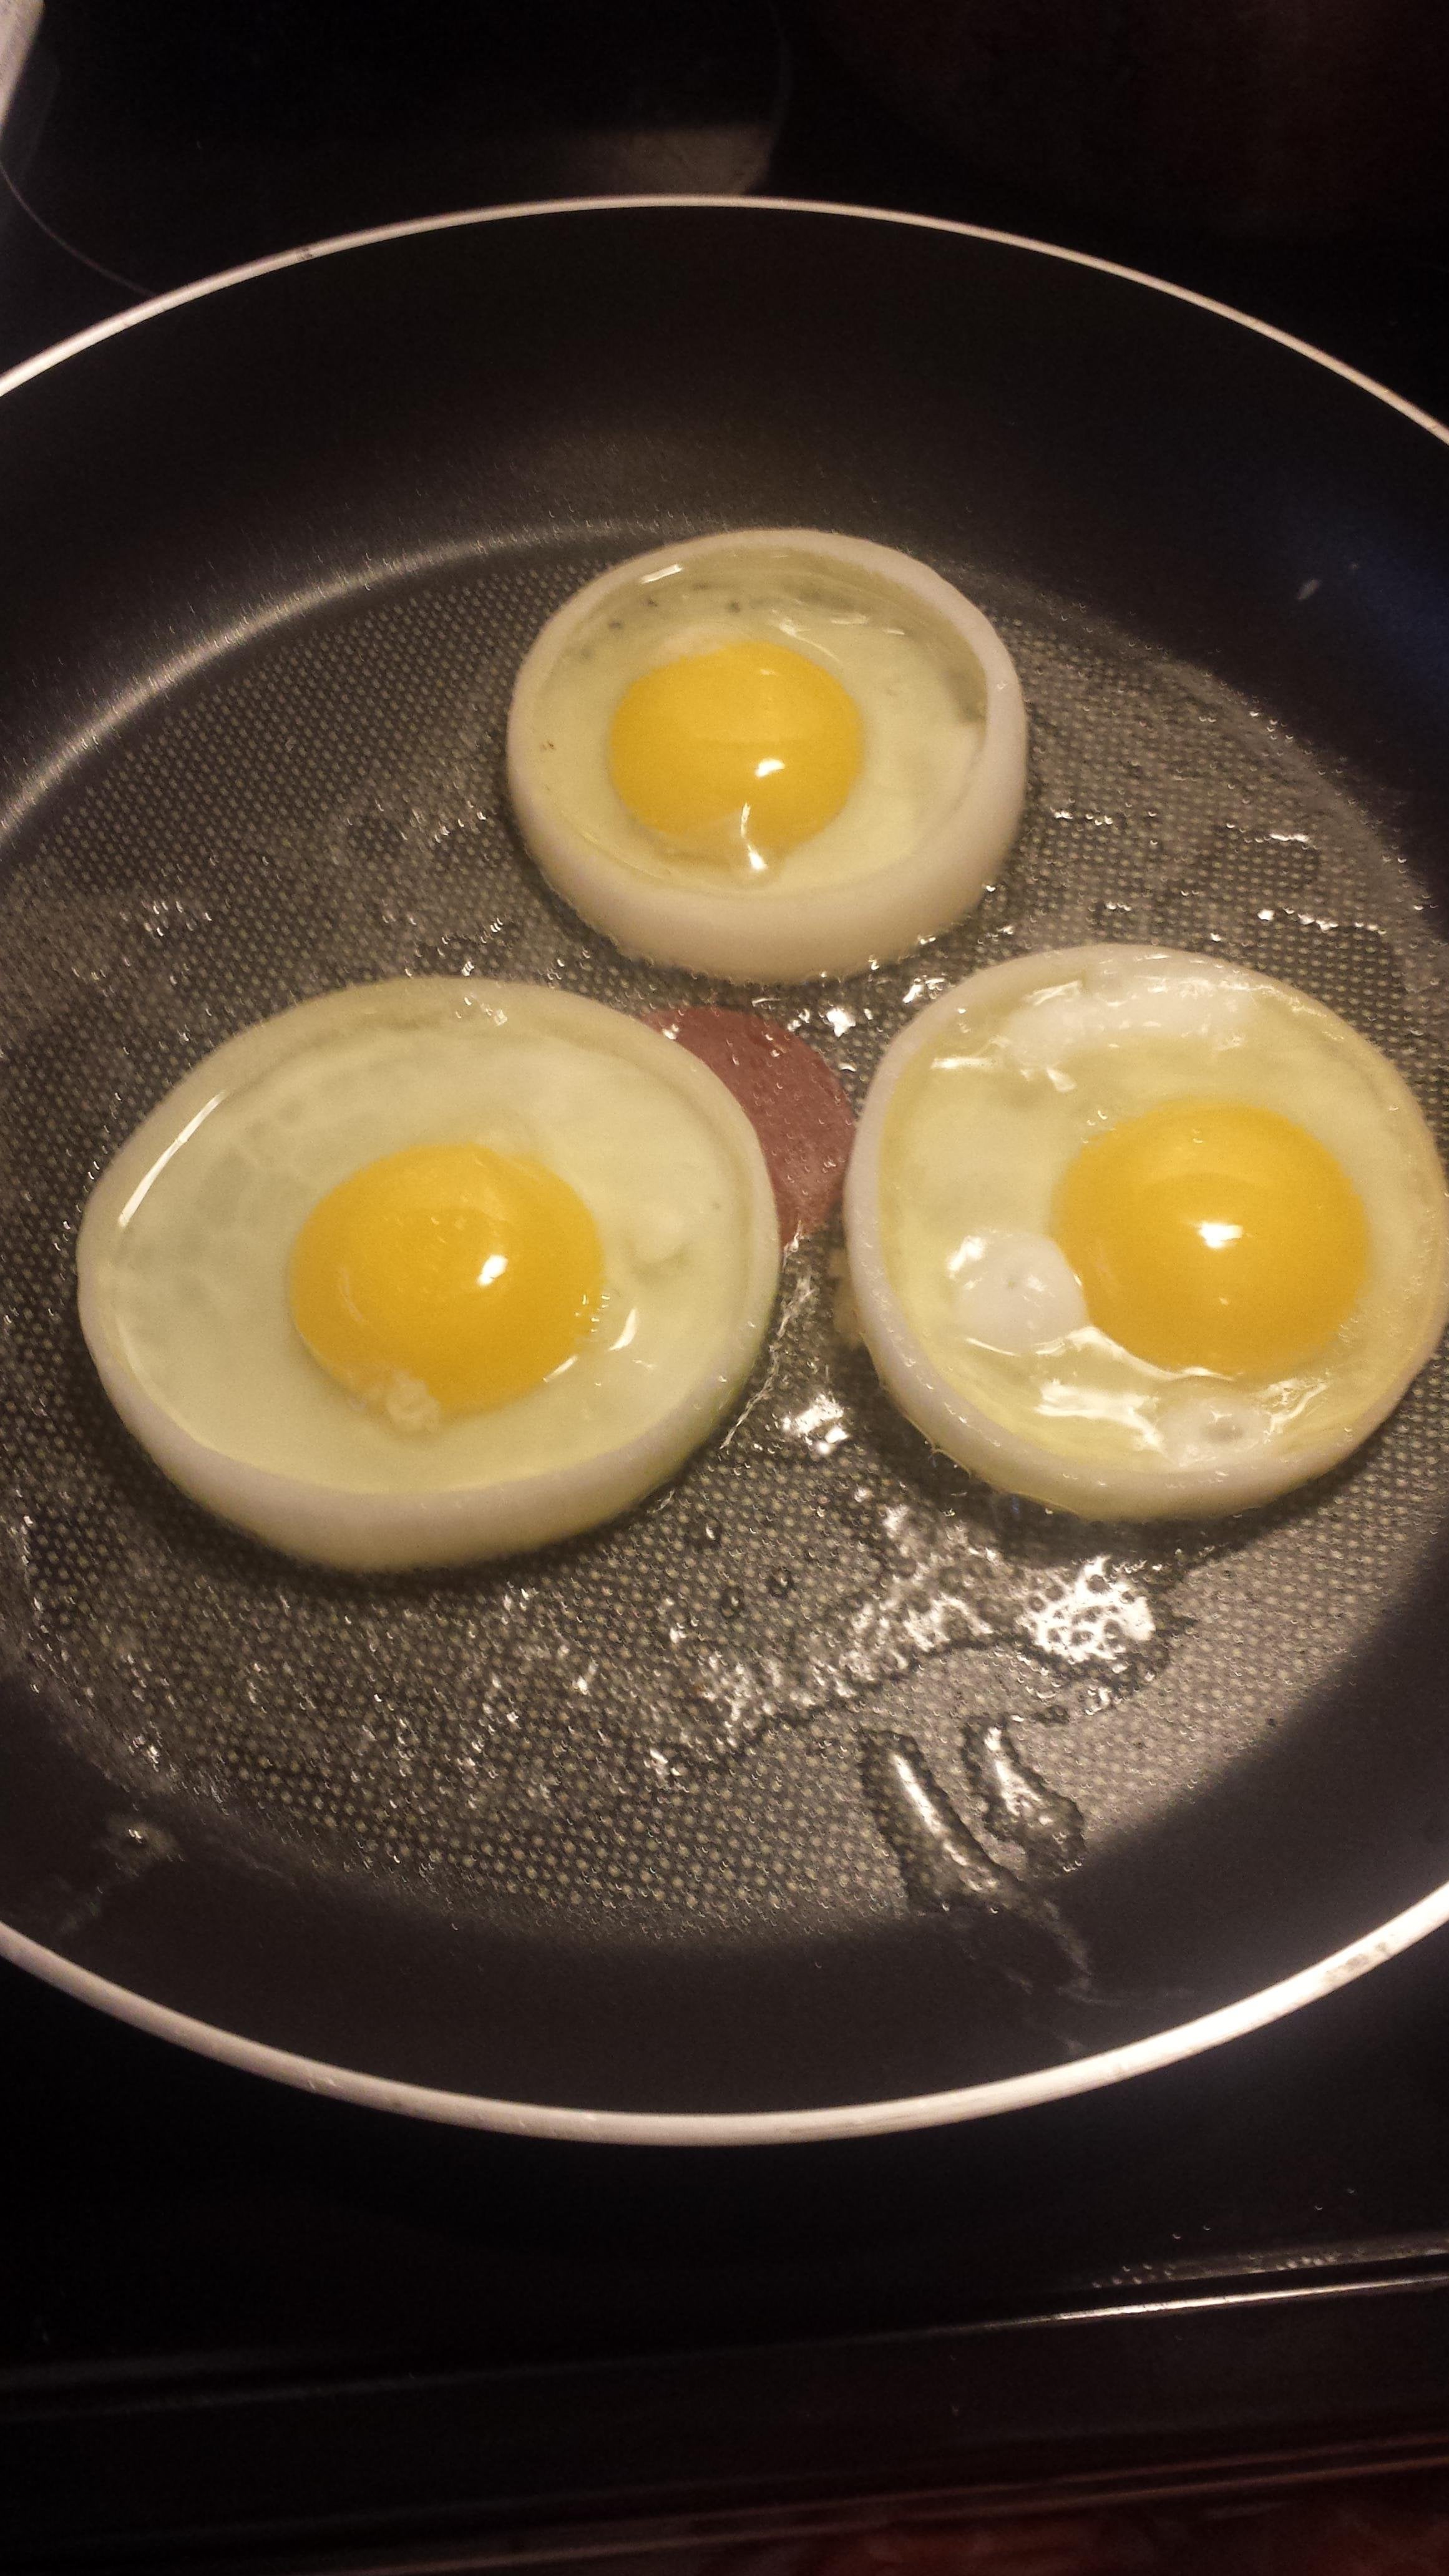 Hack - Make a Perfectly Round Fried Egg